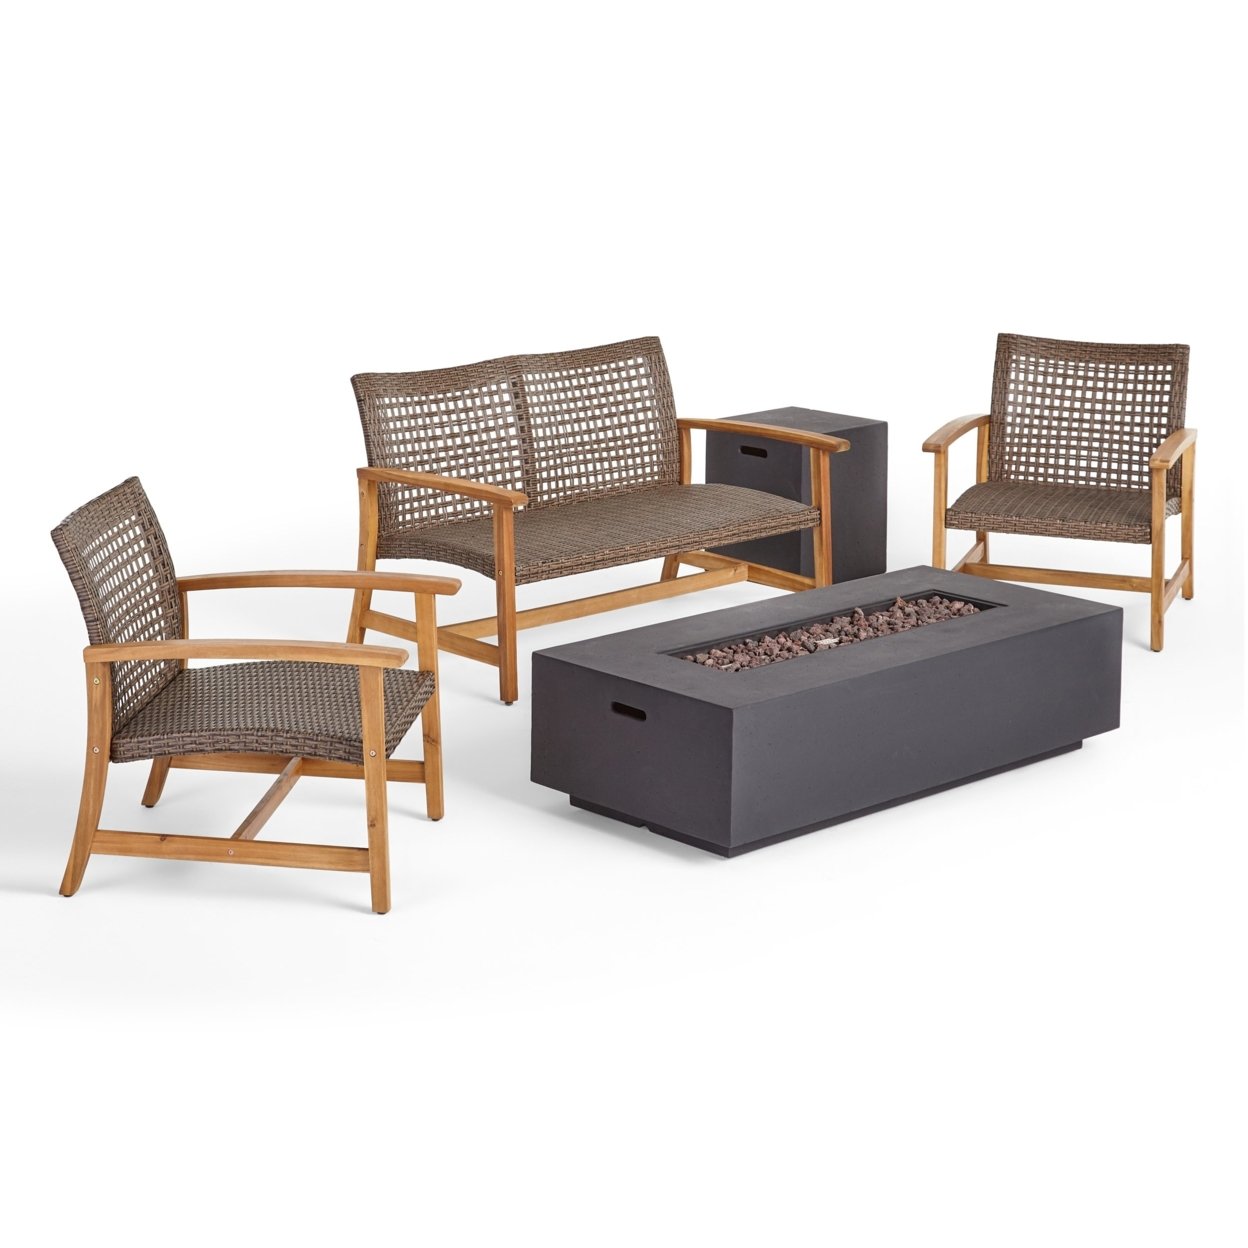 Allison Outdoor 5 Piece Wood And Wicker Chat Set With Fire Pit - Natural, Dark Gray